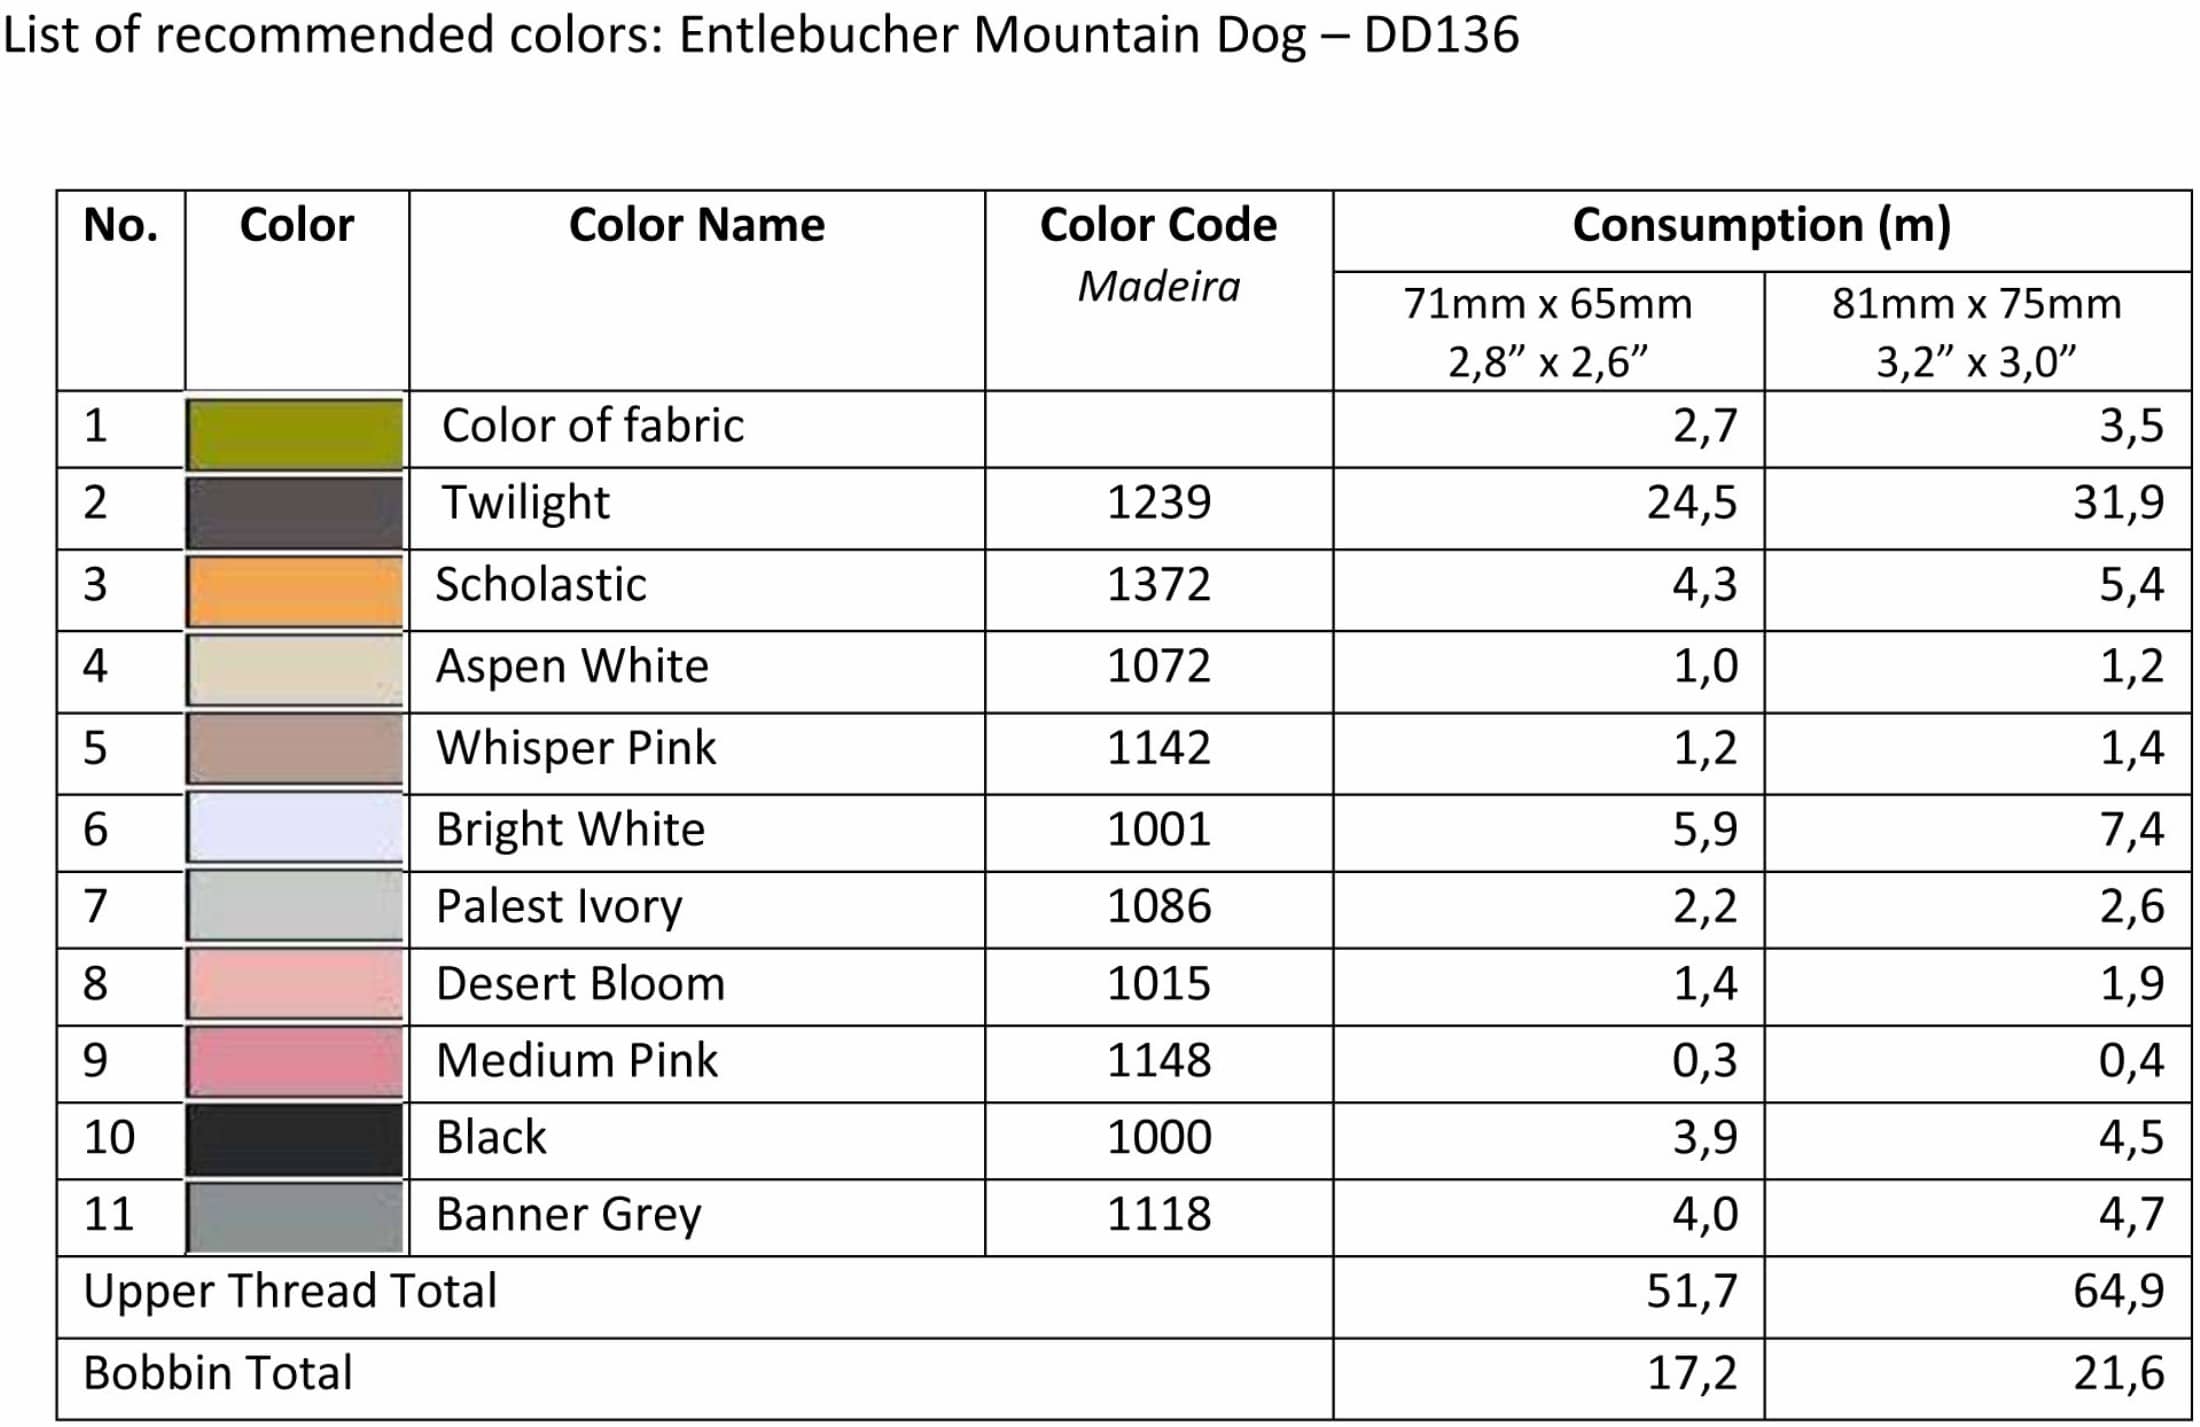 List of recommended colors - DD136